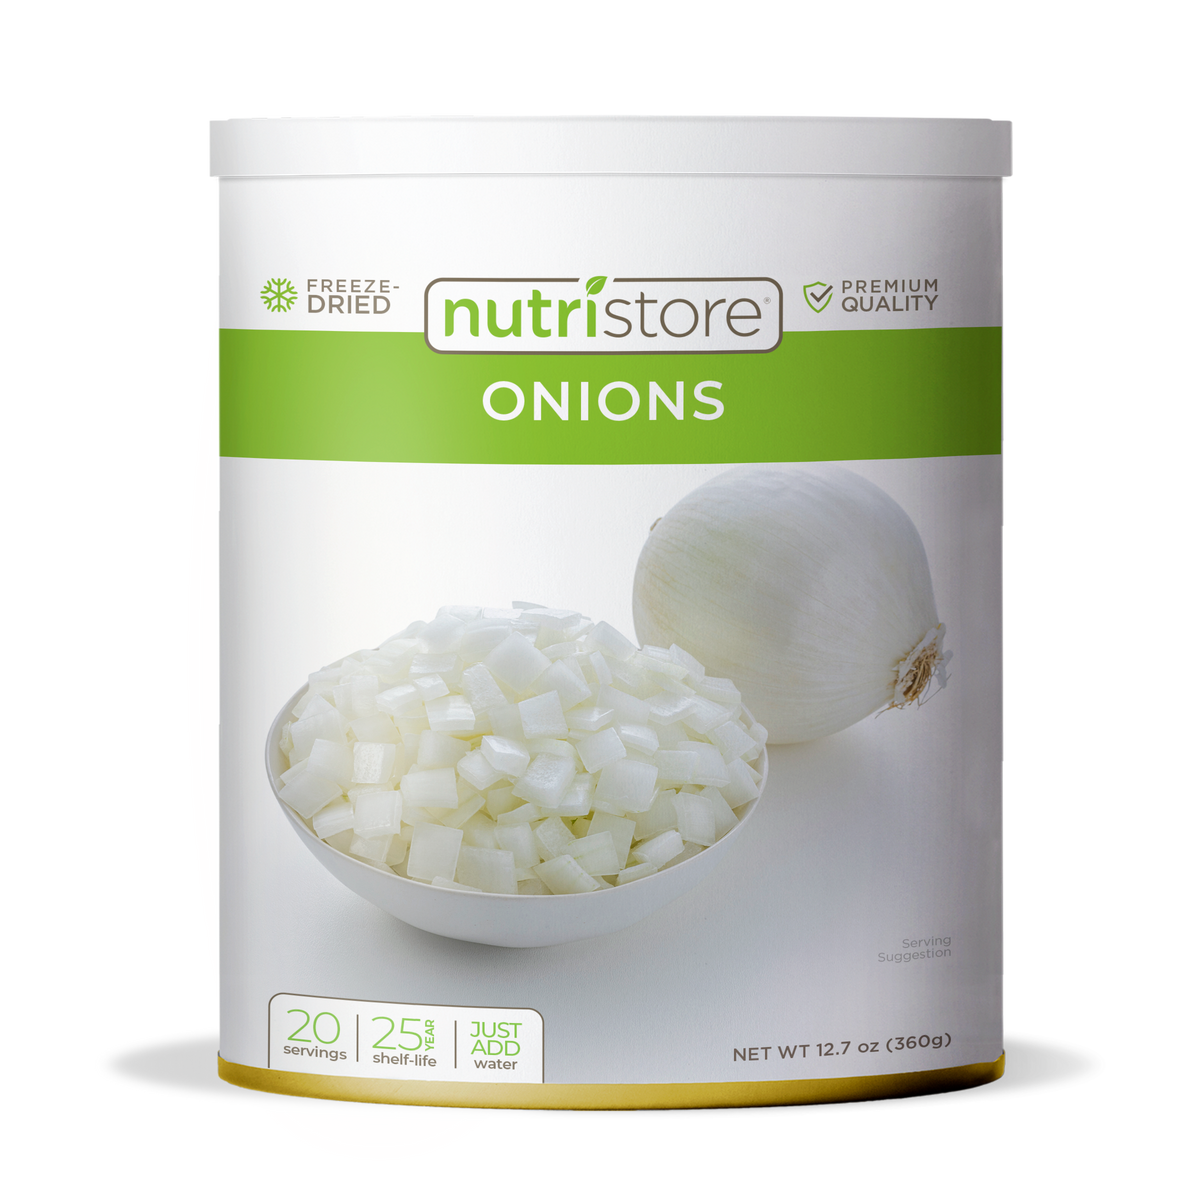 Onions Freeze Dried - #10 Can by Nutristore